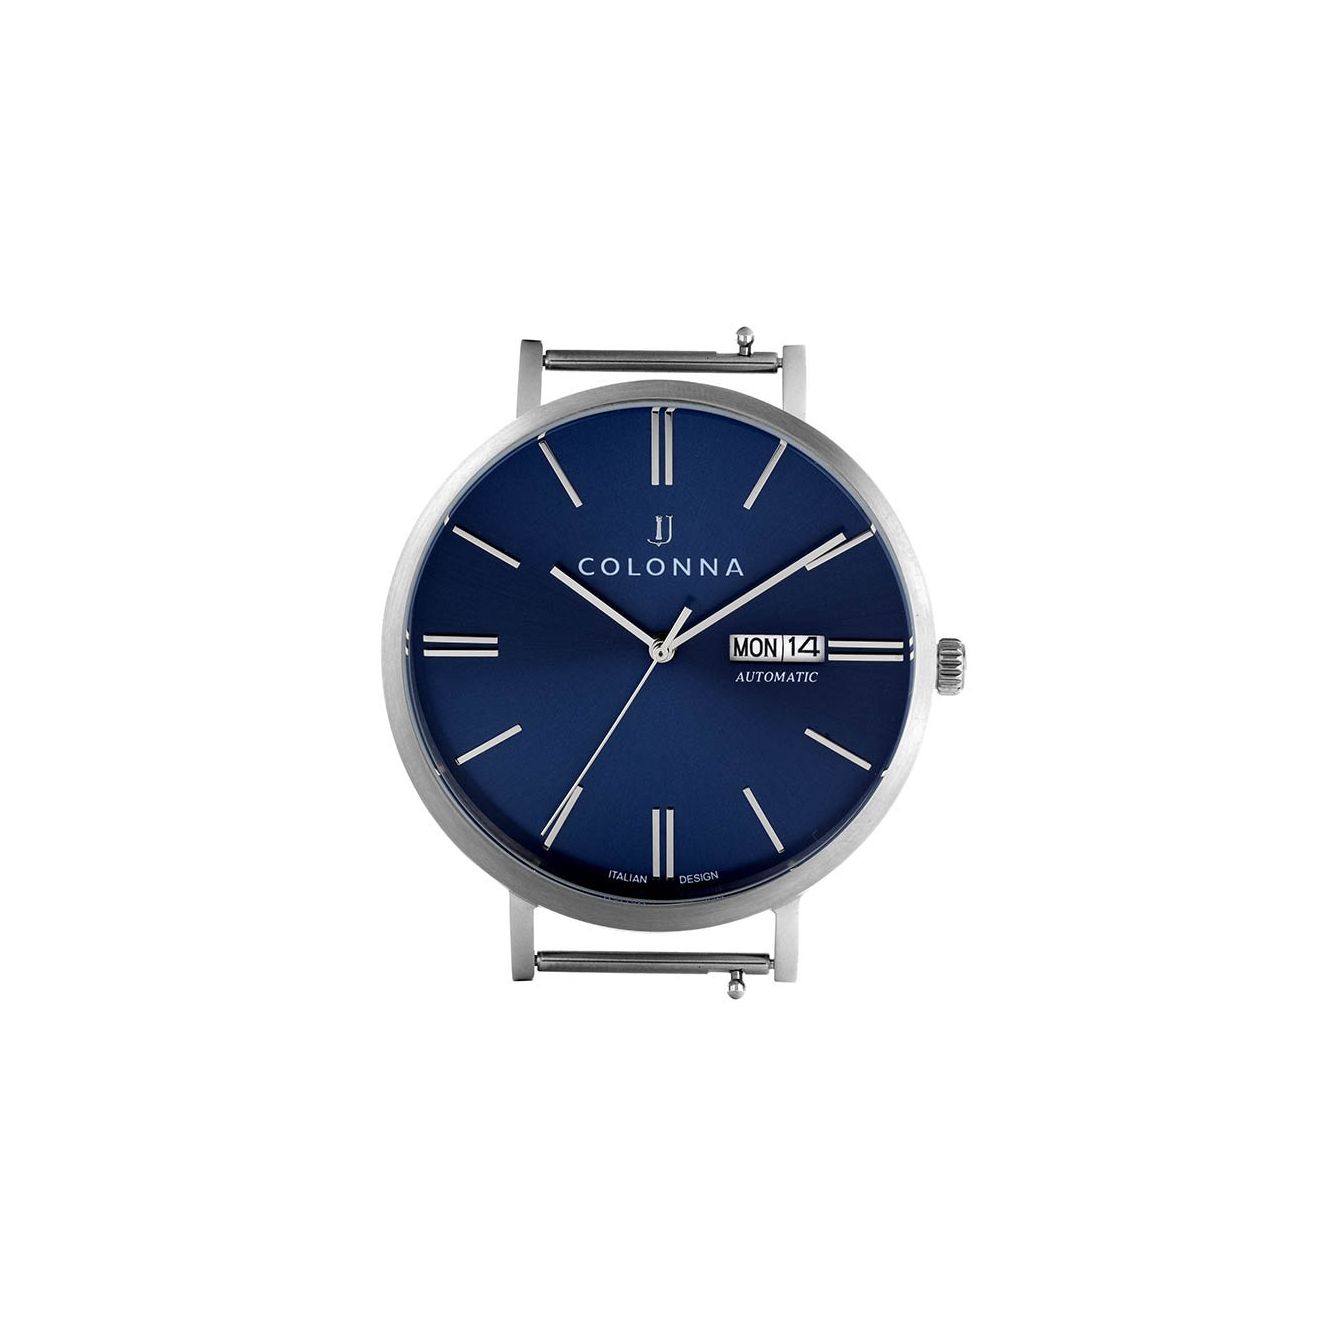 AUTOMATIC - SILVER CASE 42 MM BLUE DEAL